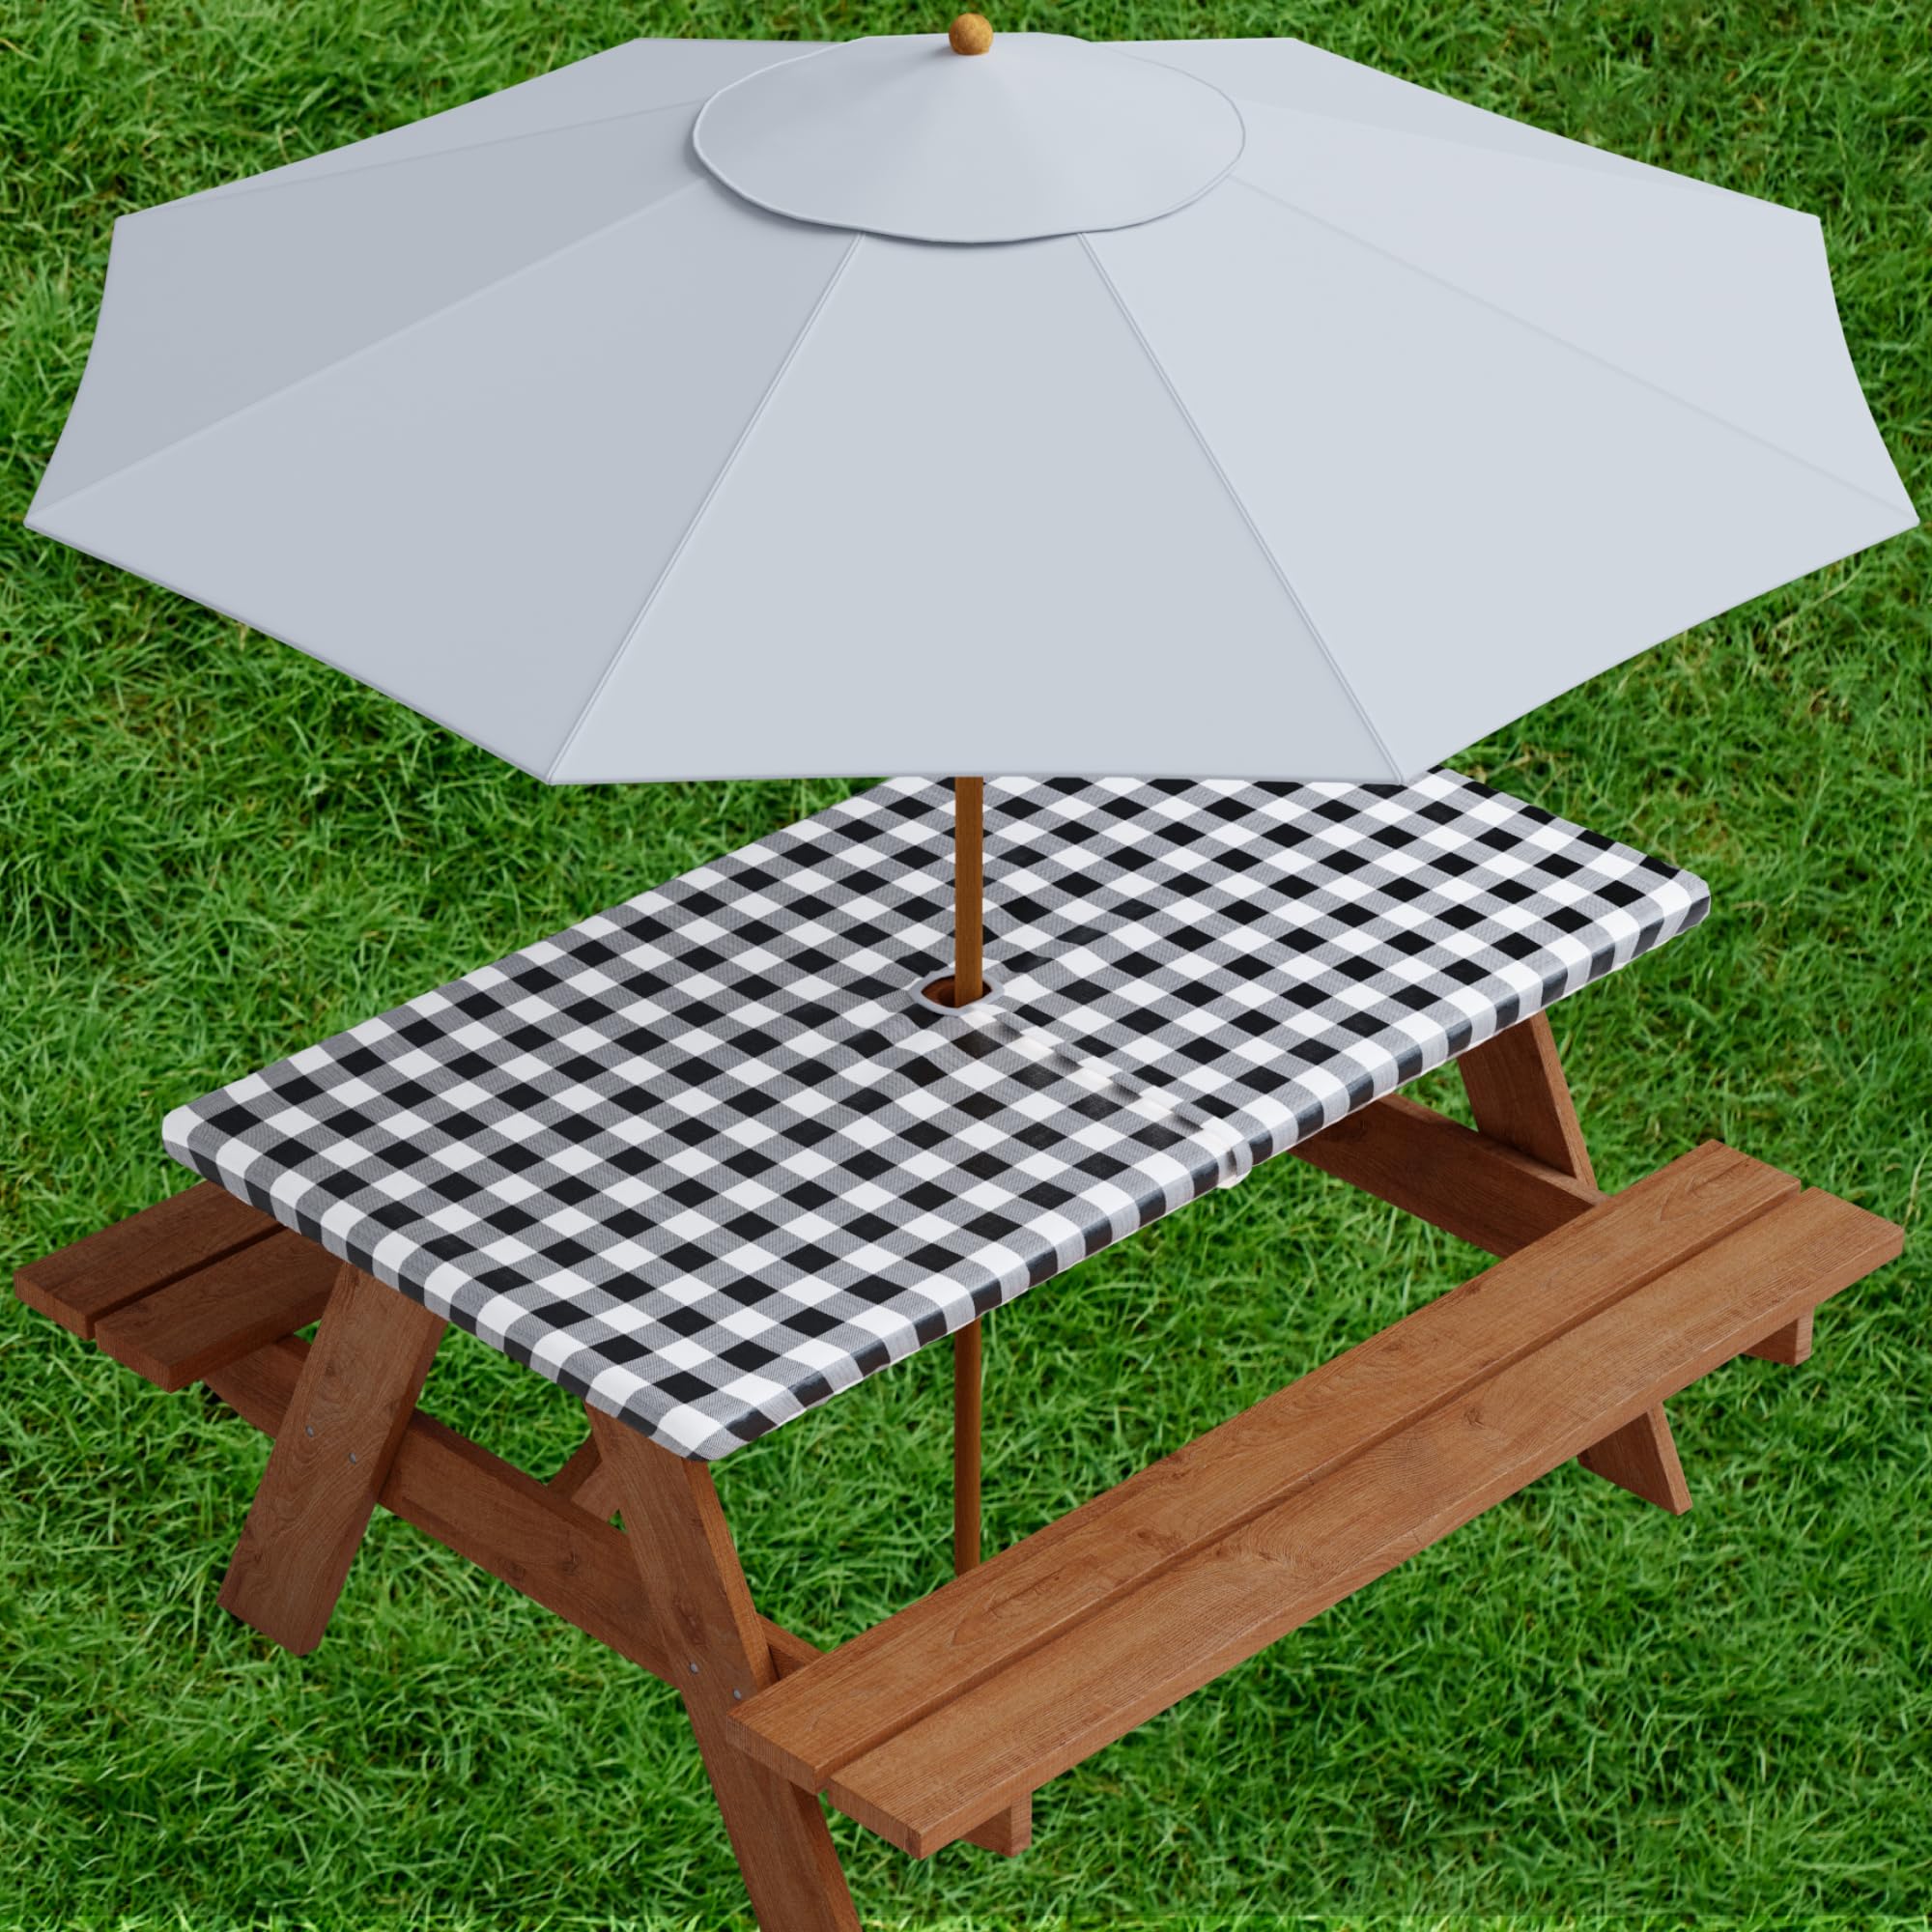 Sorfey Vinyl Umbrella Round Fitted Tablecloth Cover, Checkered Design,  - Collectible Very Good